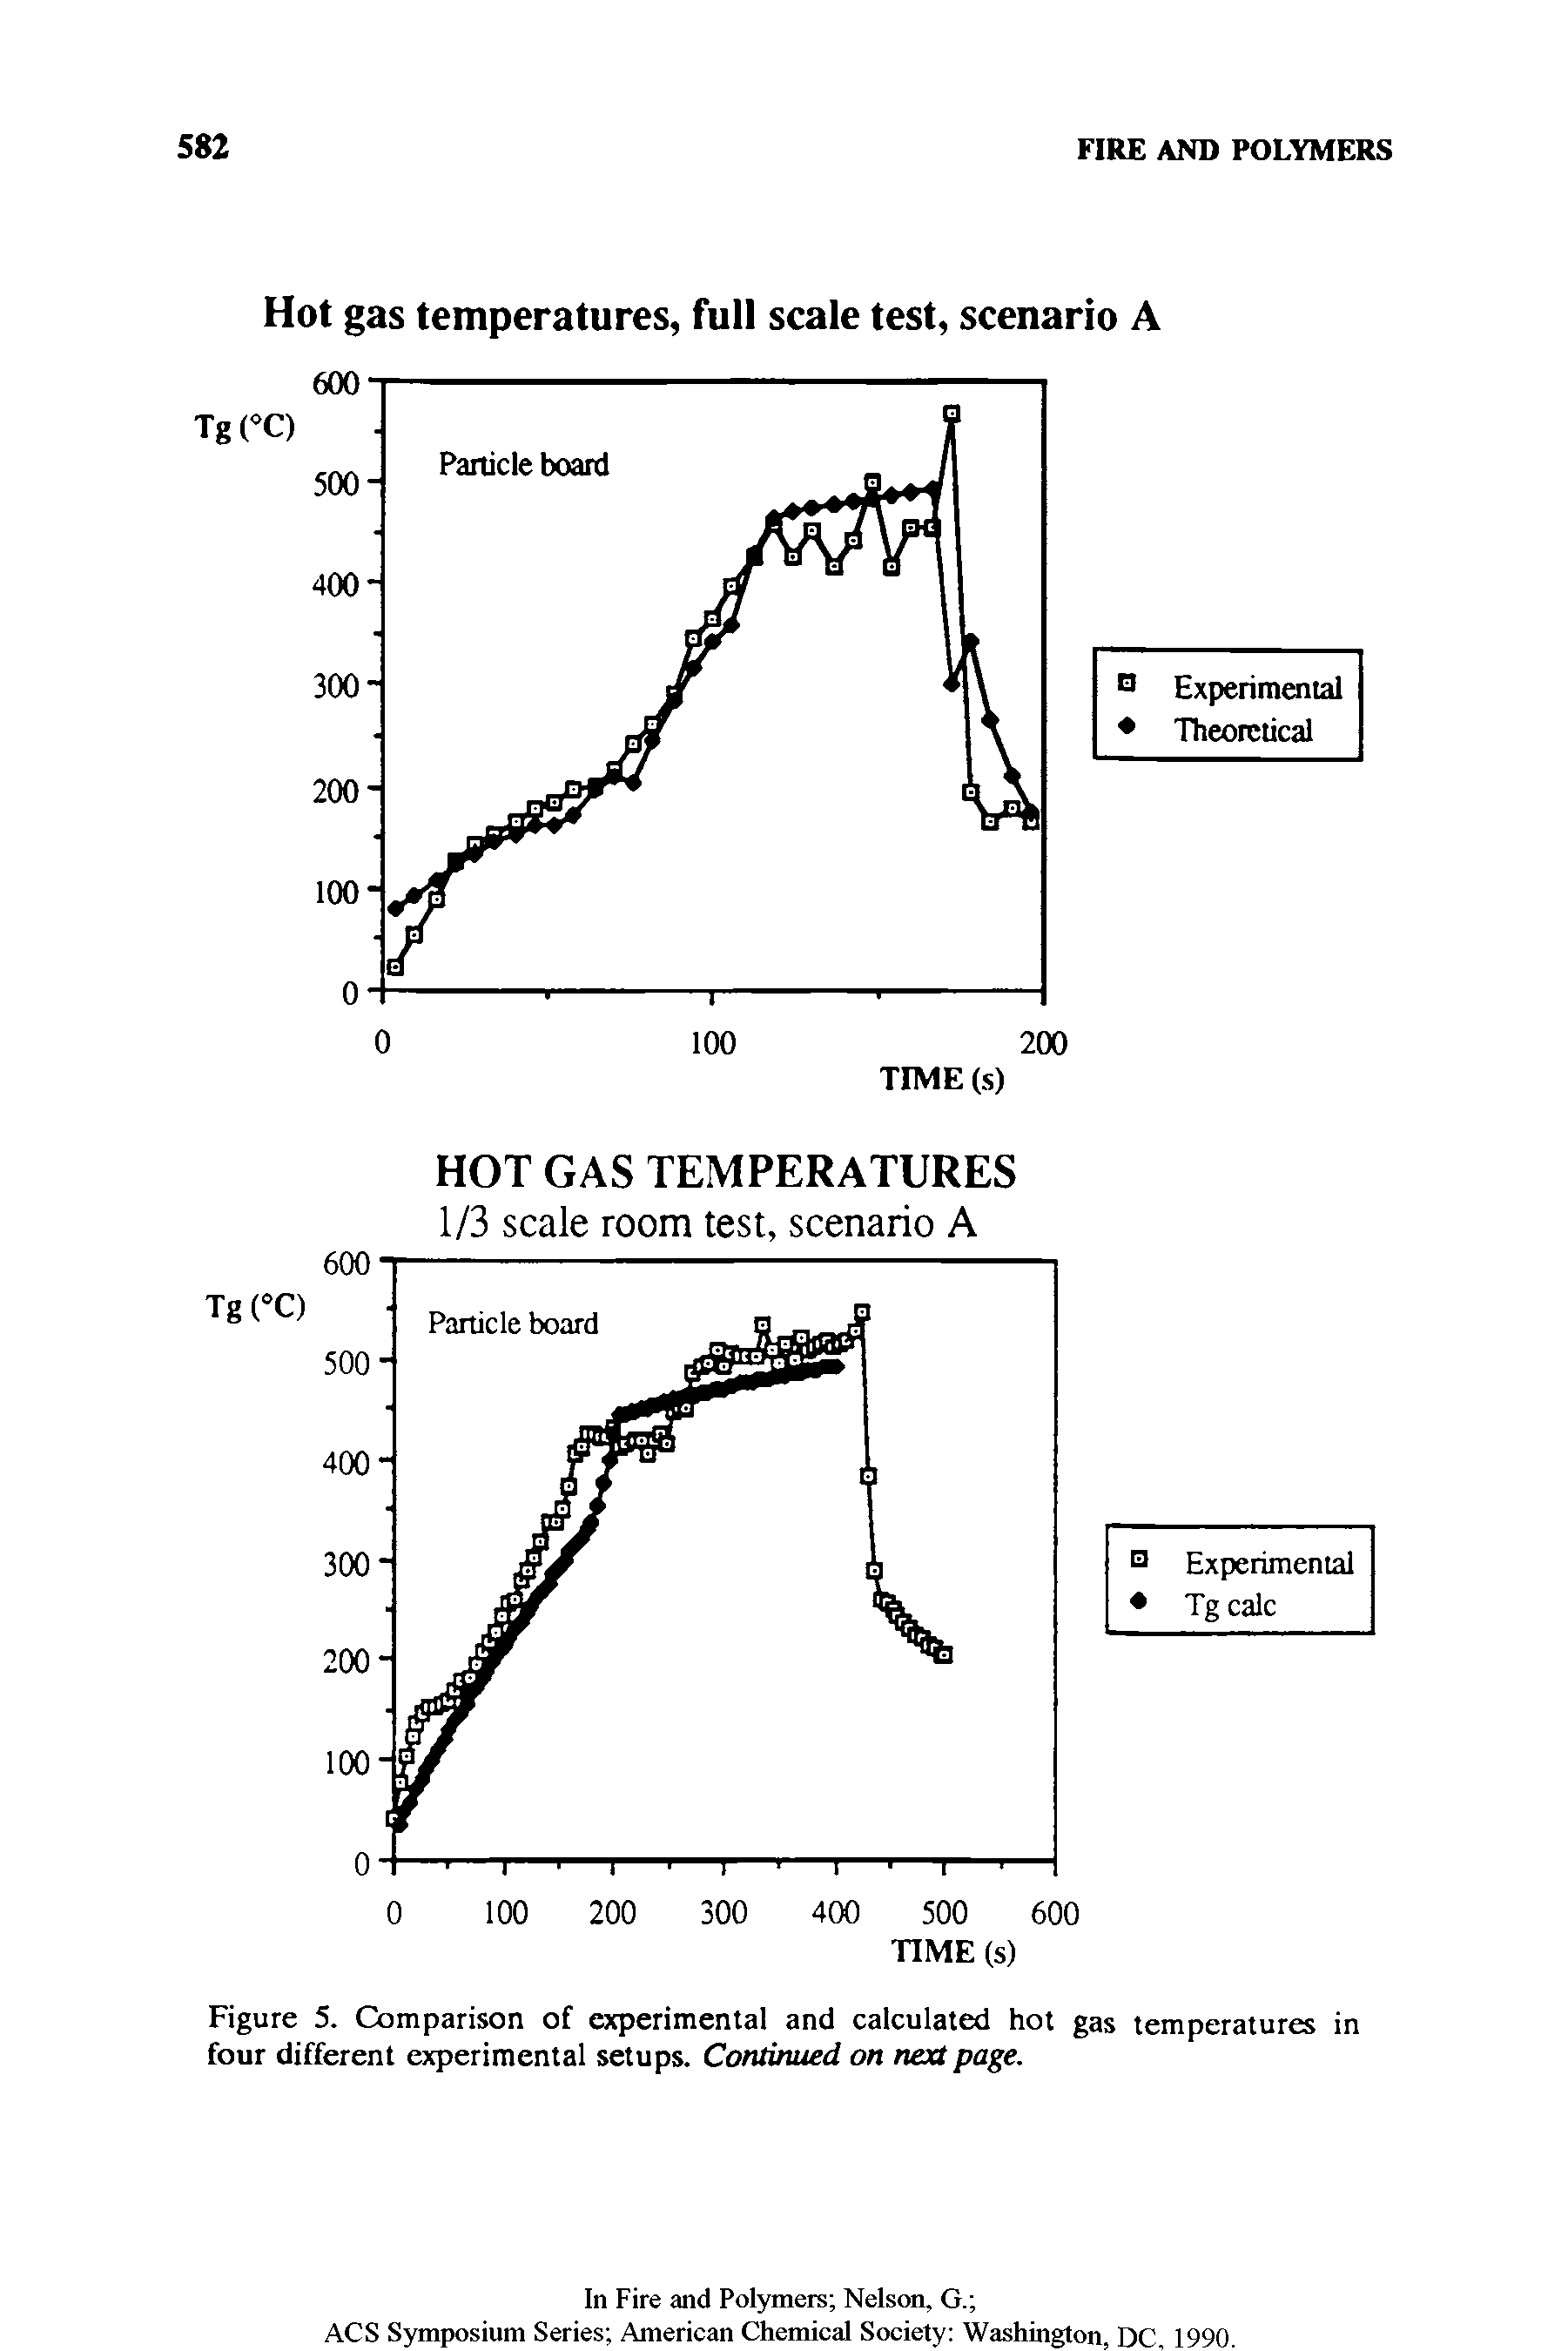 Figure 5. Comparison of experimental and calculated hot gas temperatures in four different experimental setups. Continued on next page.